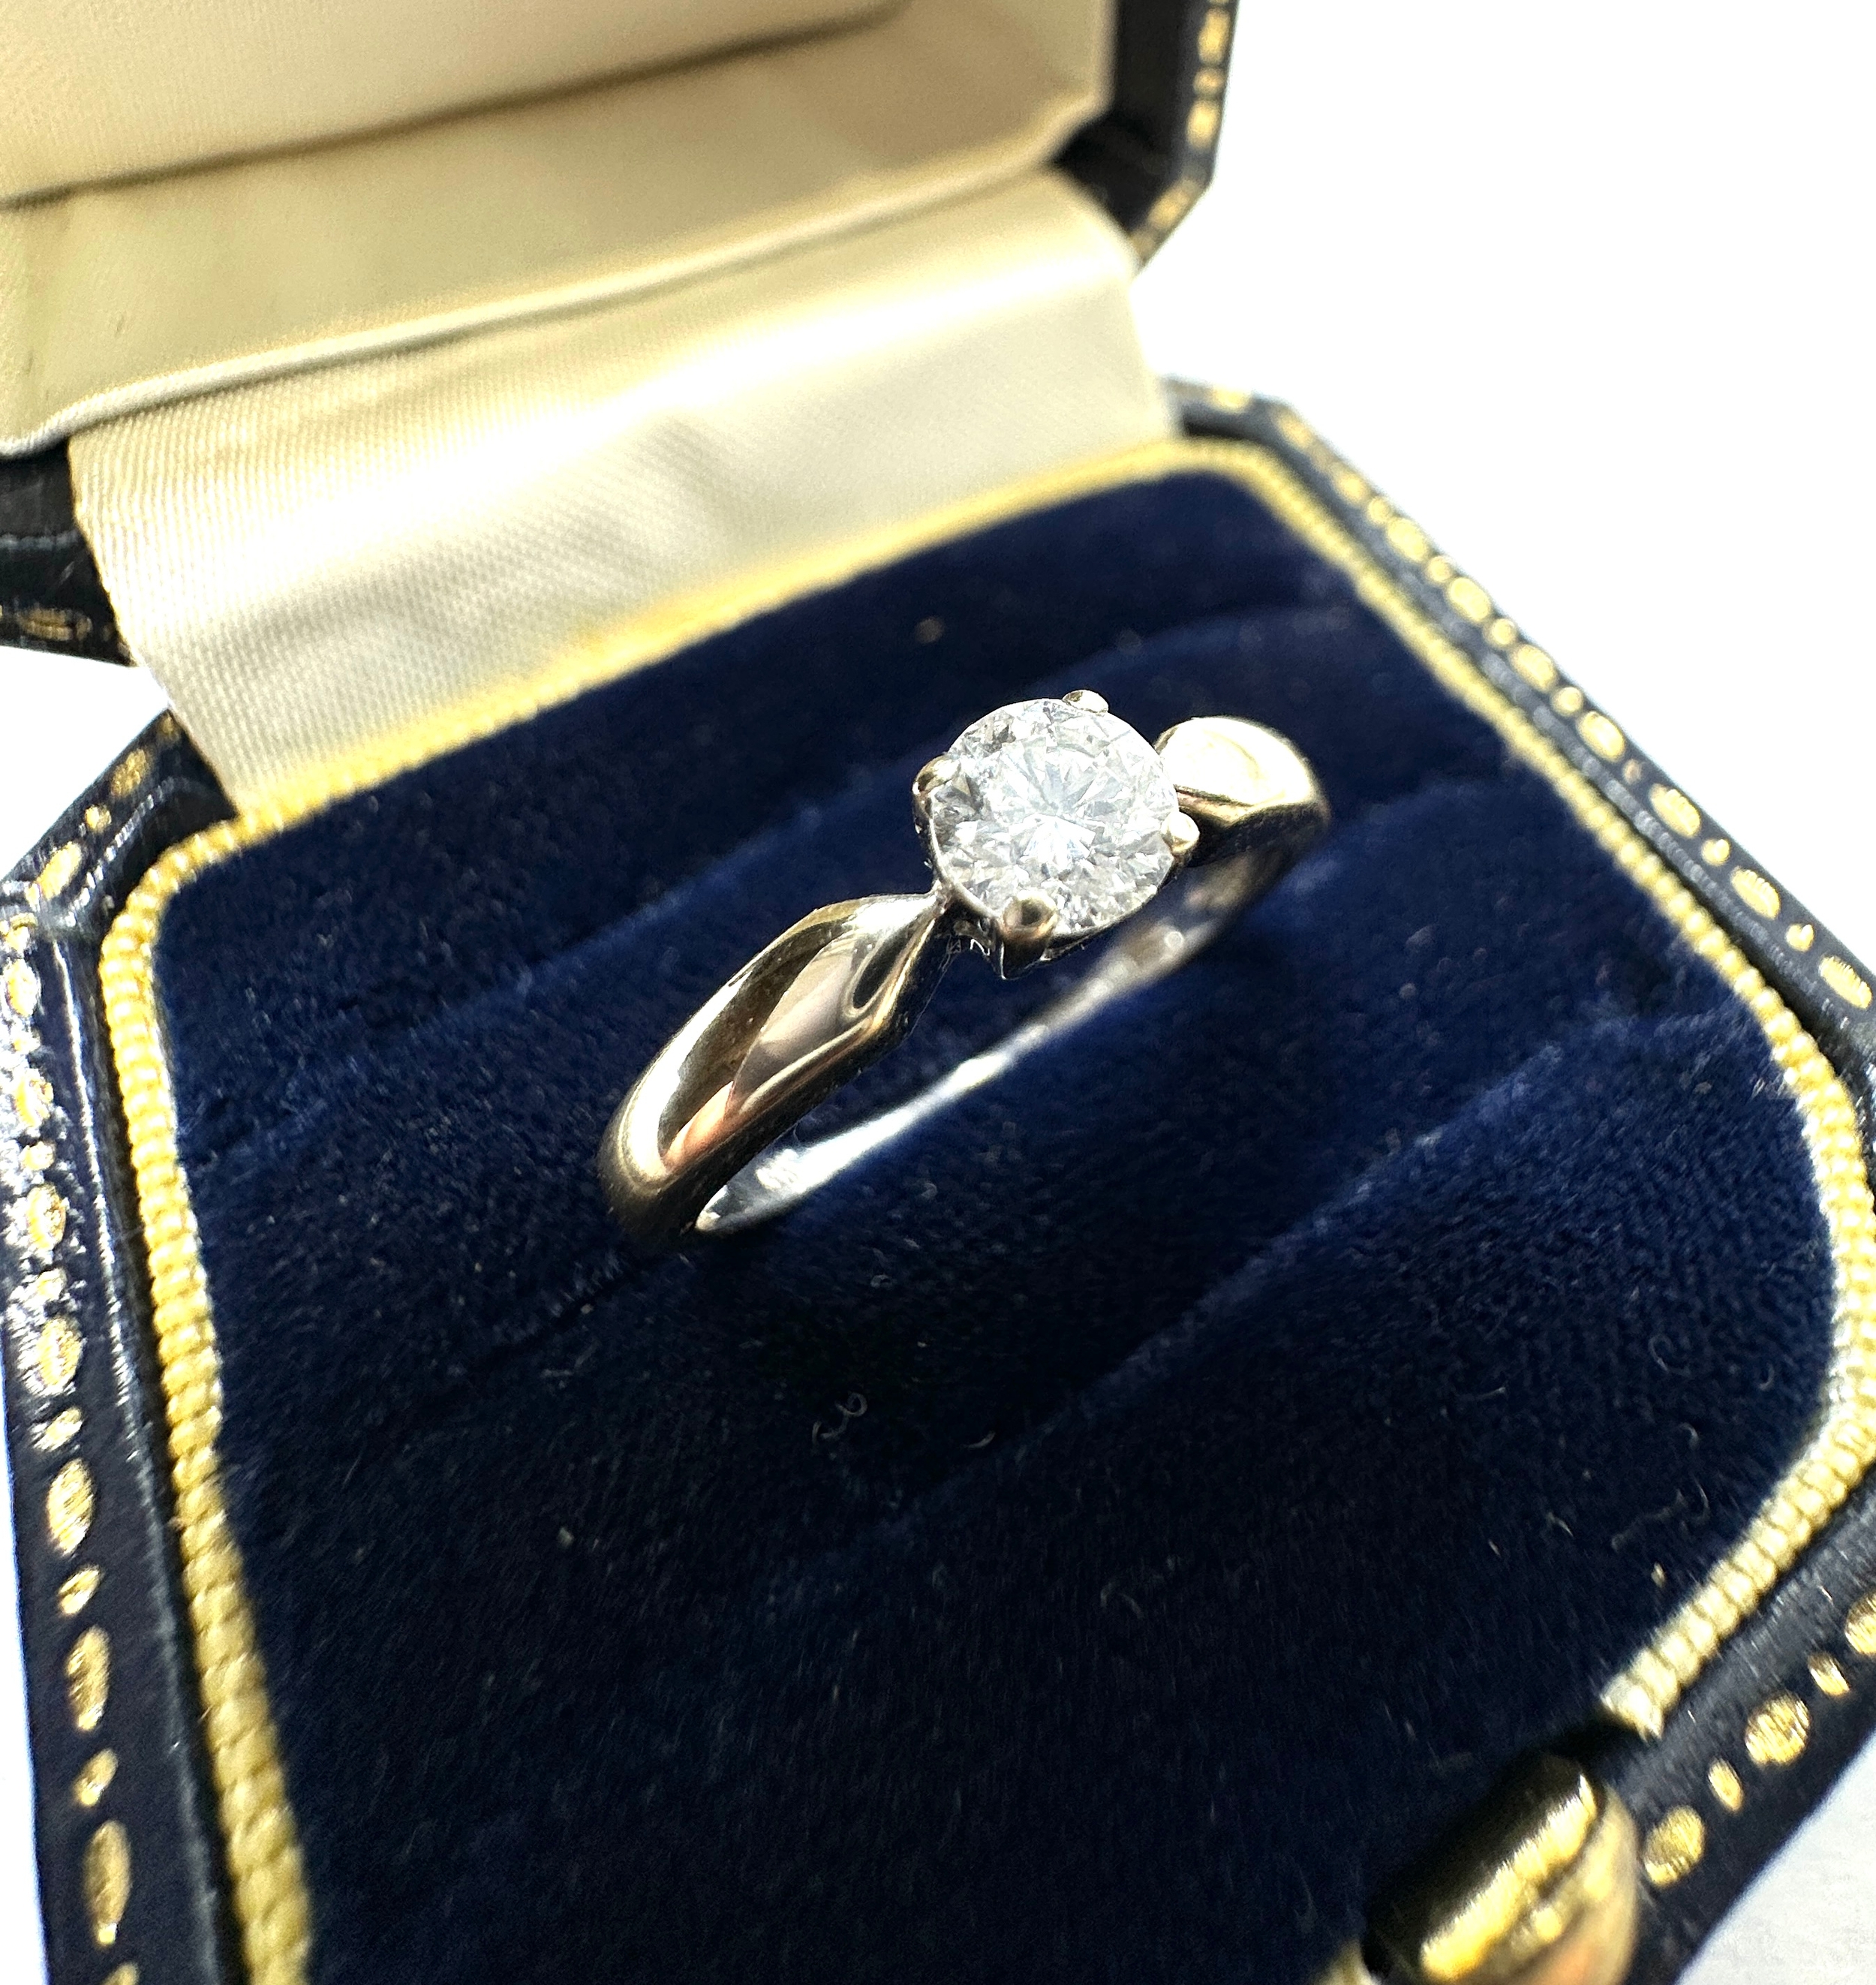 18ct gold diamond solitaire ring diamond measures approx 4.1mm dia weight 2.3g - Image 2 of 4